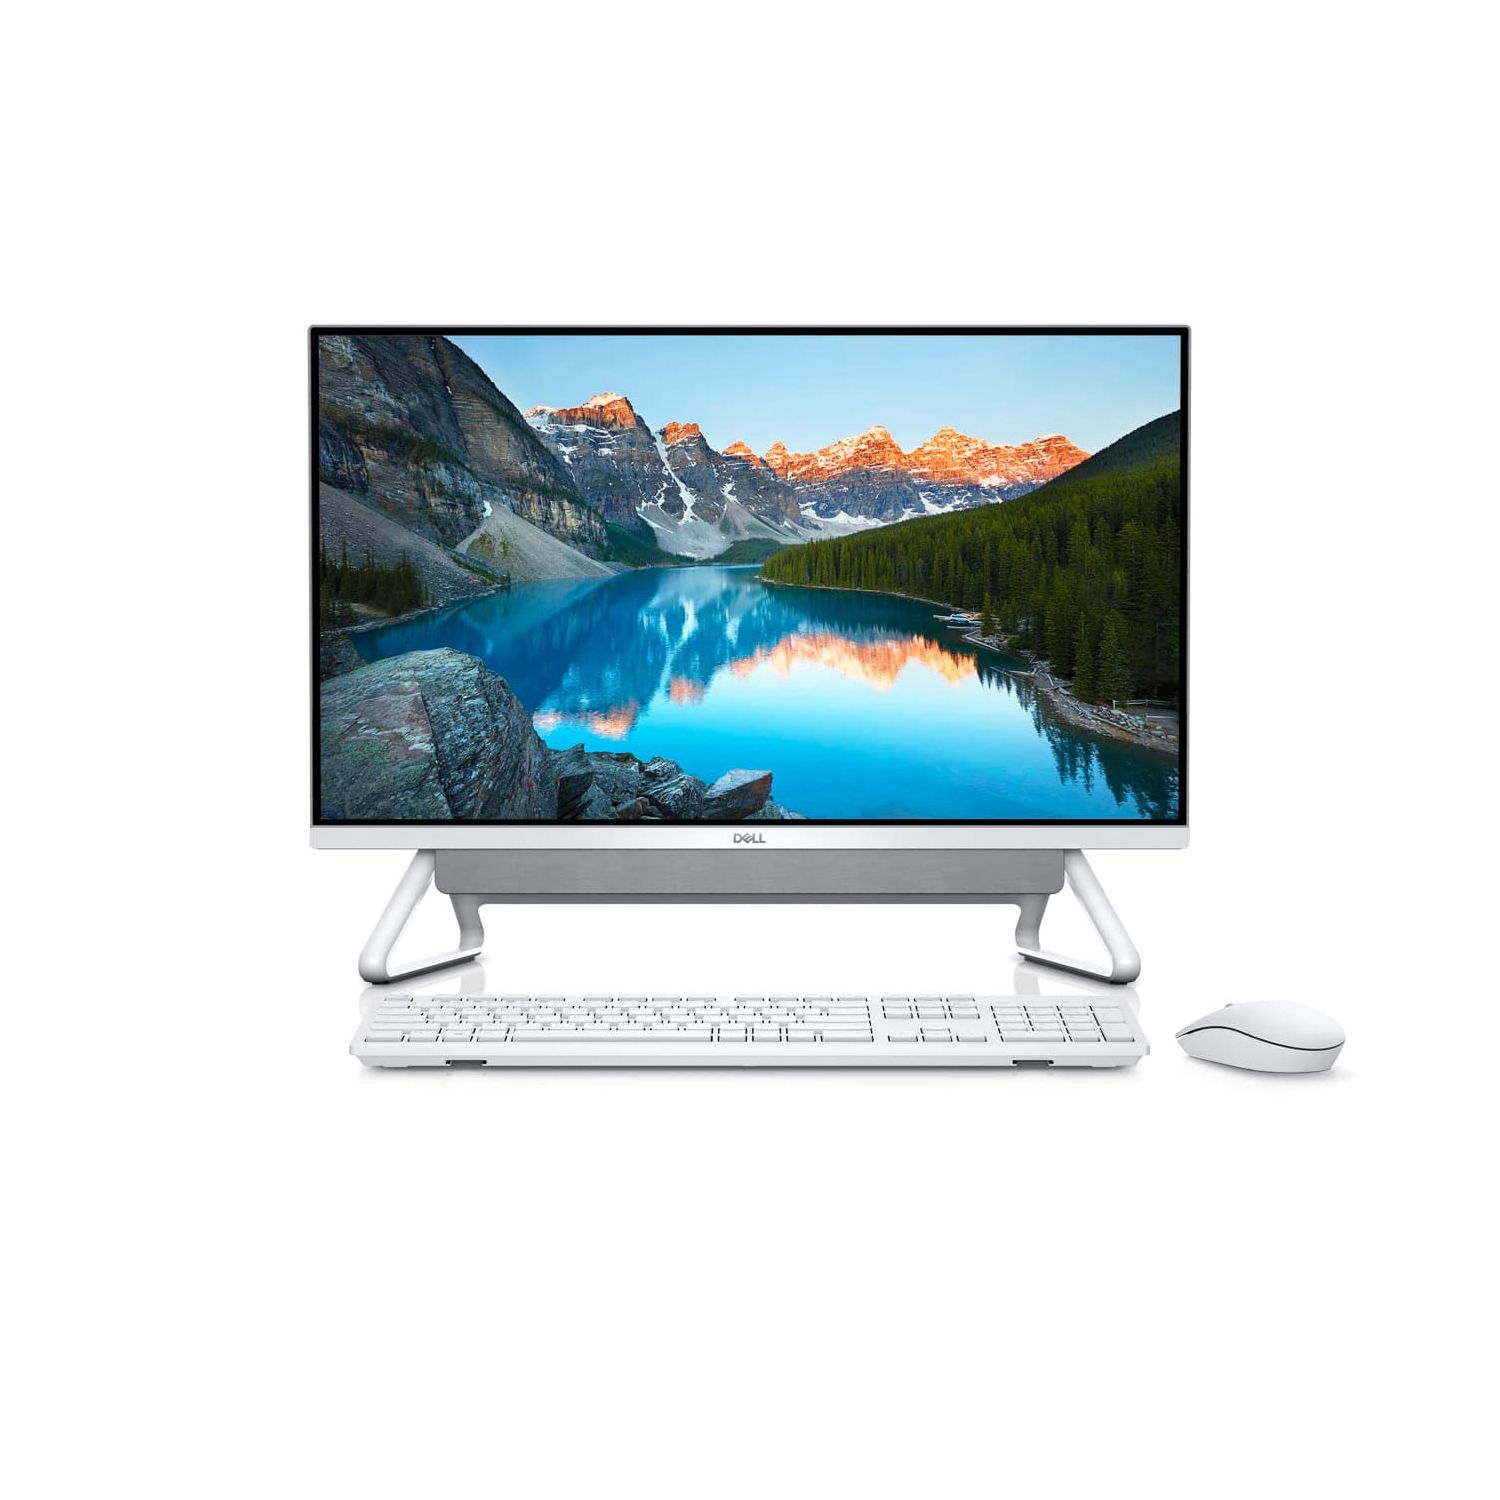 Refurbished (Excellent) - Dell Inspiron 27 7790 AIO (2019), 27" FHD Touch, Core i5 - 1TB HDD + 256GB SSD - 8GB RAM, 4 Cores @ 4.2 GHz - 10th Gen CPU Certified Refurbished